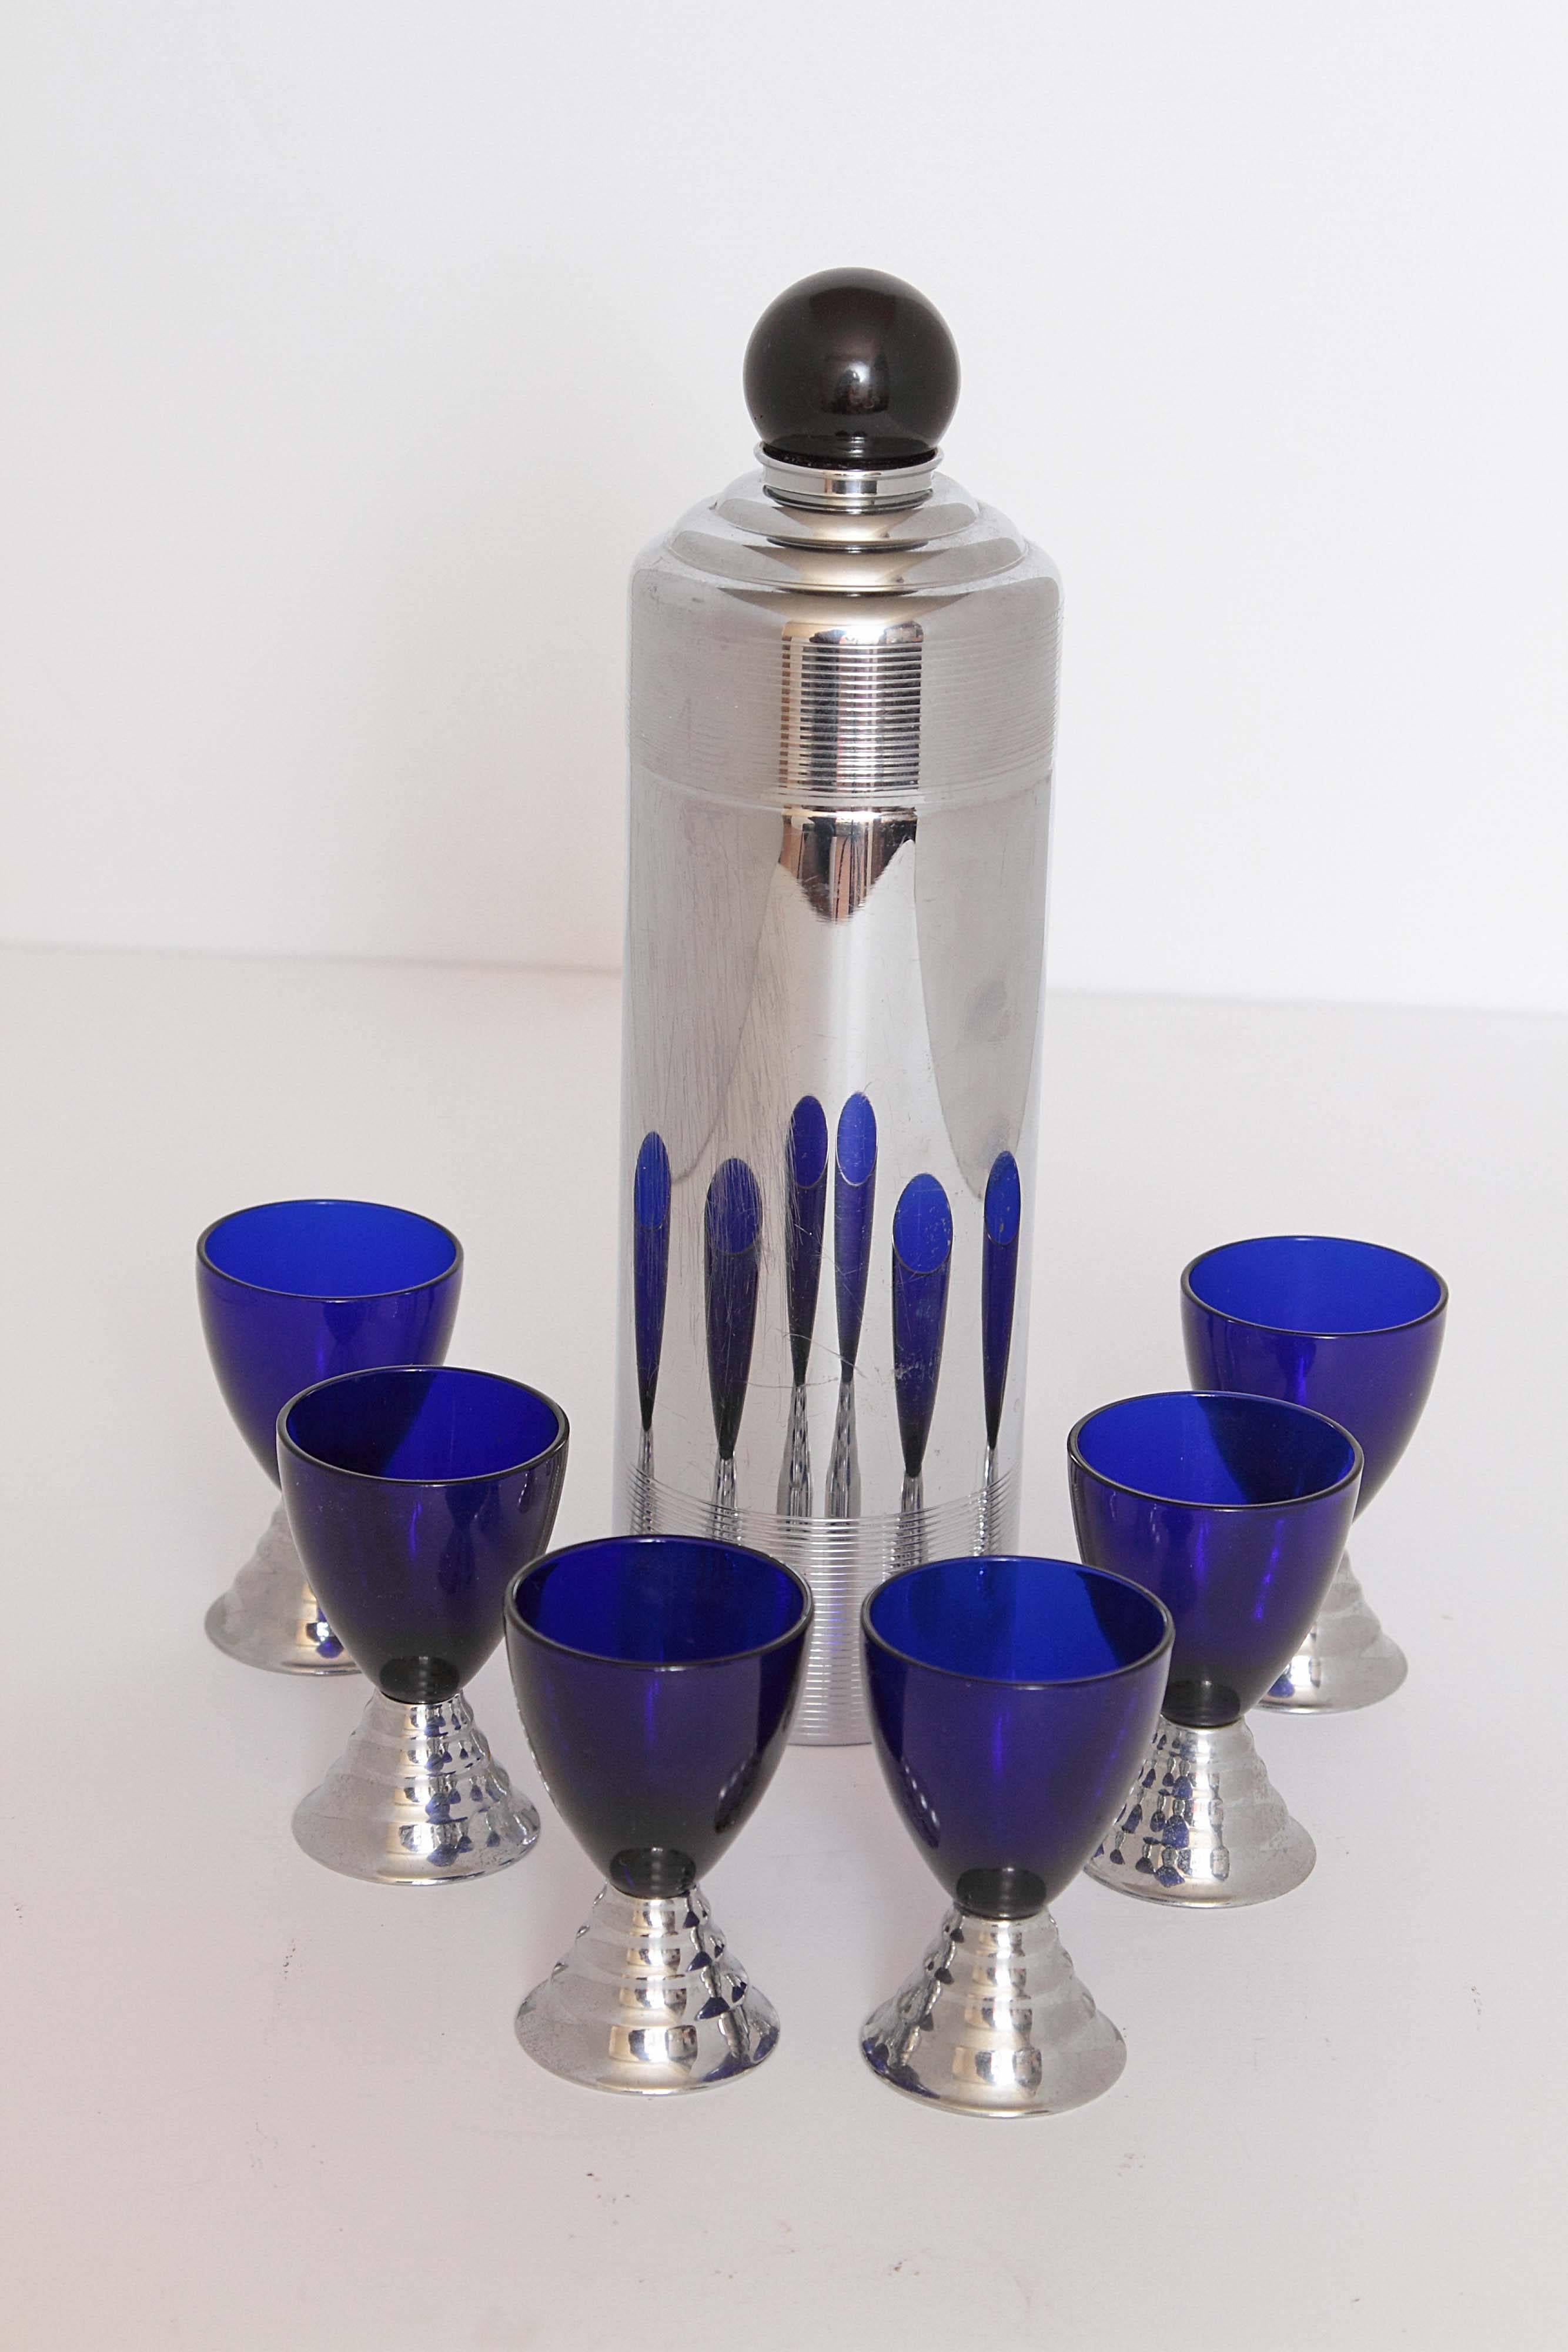 Removable deep amethyst Catalin jigger top.
Integral strainer in top cap. Nice cobalt/chrome cups. Excludes ring tray.
Set is in good vintage used condition, all pieces stamped with Chase logo.

Blue Moon Shaker by Howard Reichenbach, introduced